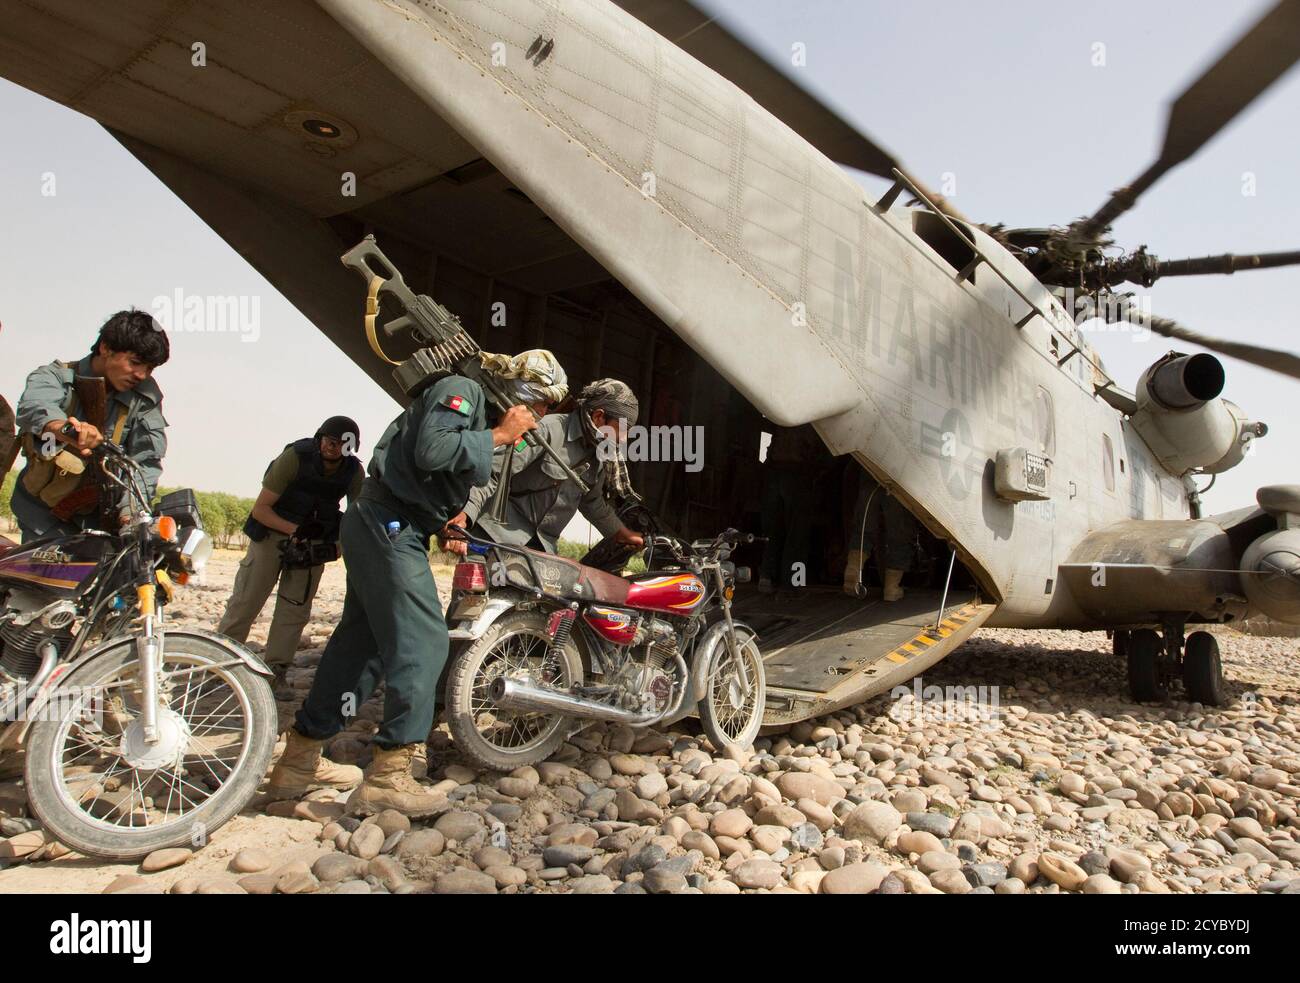 Members of Afghan National Police (ANP) board with motorcycles on a U.S. Marines CH-53E Super Stallion helicopter for a Western Engagement operation at the Camp Gorgak in Helmand province, southern Afghanistan, July 7, 2011. U.S. Marines and Afghan security forces conducted a joint operation aiming to extend their presence west of Helmand river.    REUTERS/Shamil Zhumatov  (AFGHANISTAN - Tags: POLITICS MILITARY TRANSPORT IMAGES OF THE DAY) Stock Photo